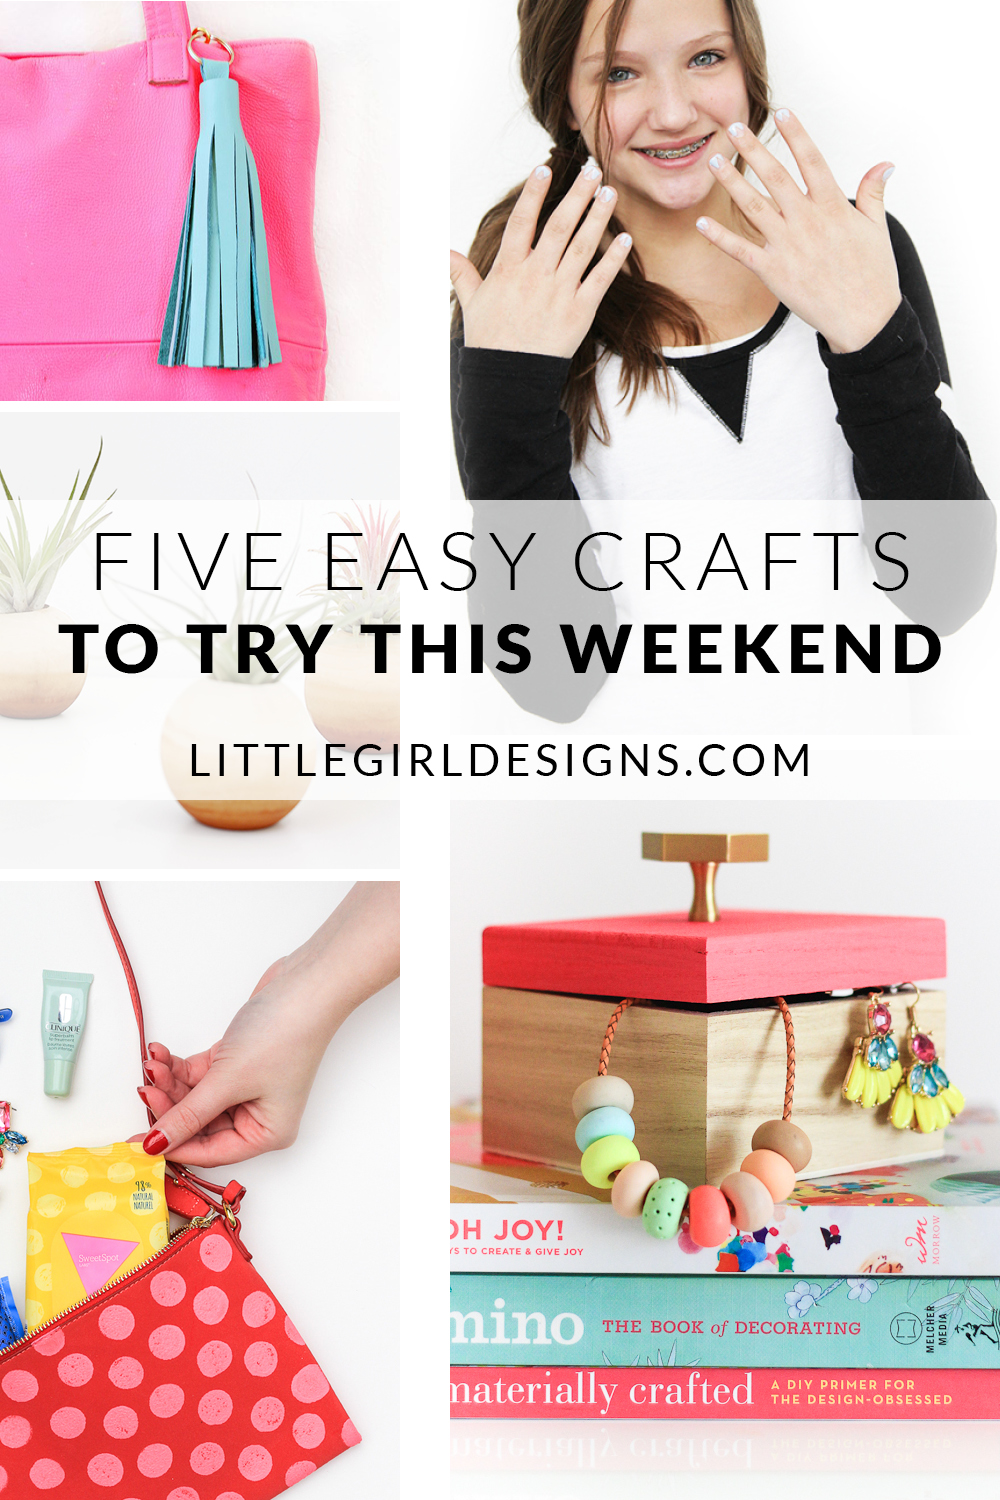 Check out these five easy (and super cute!) crafts that you can make this weekend. These are perfect #2030make projects and would also make great gifts (for yourself or your BFF)! :)